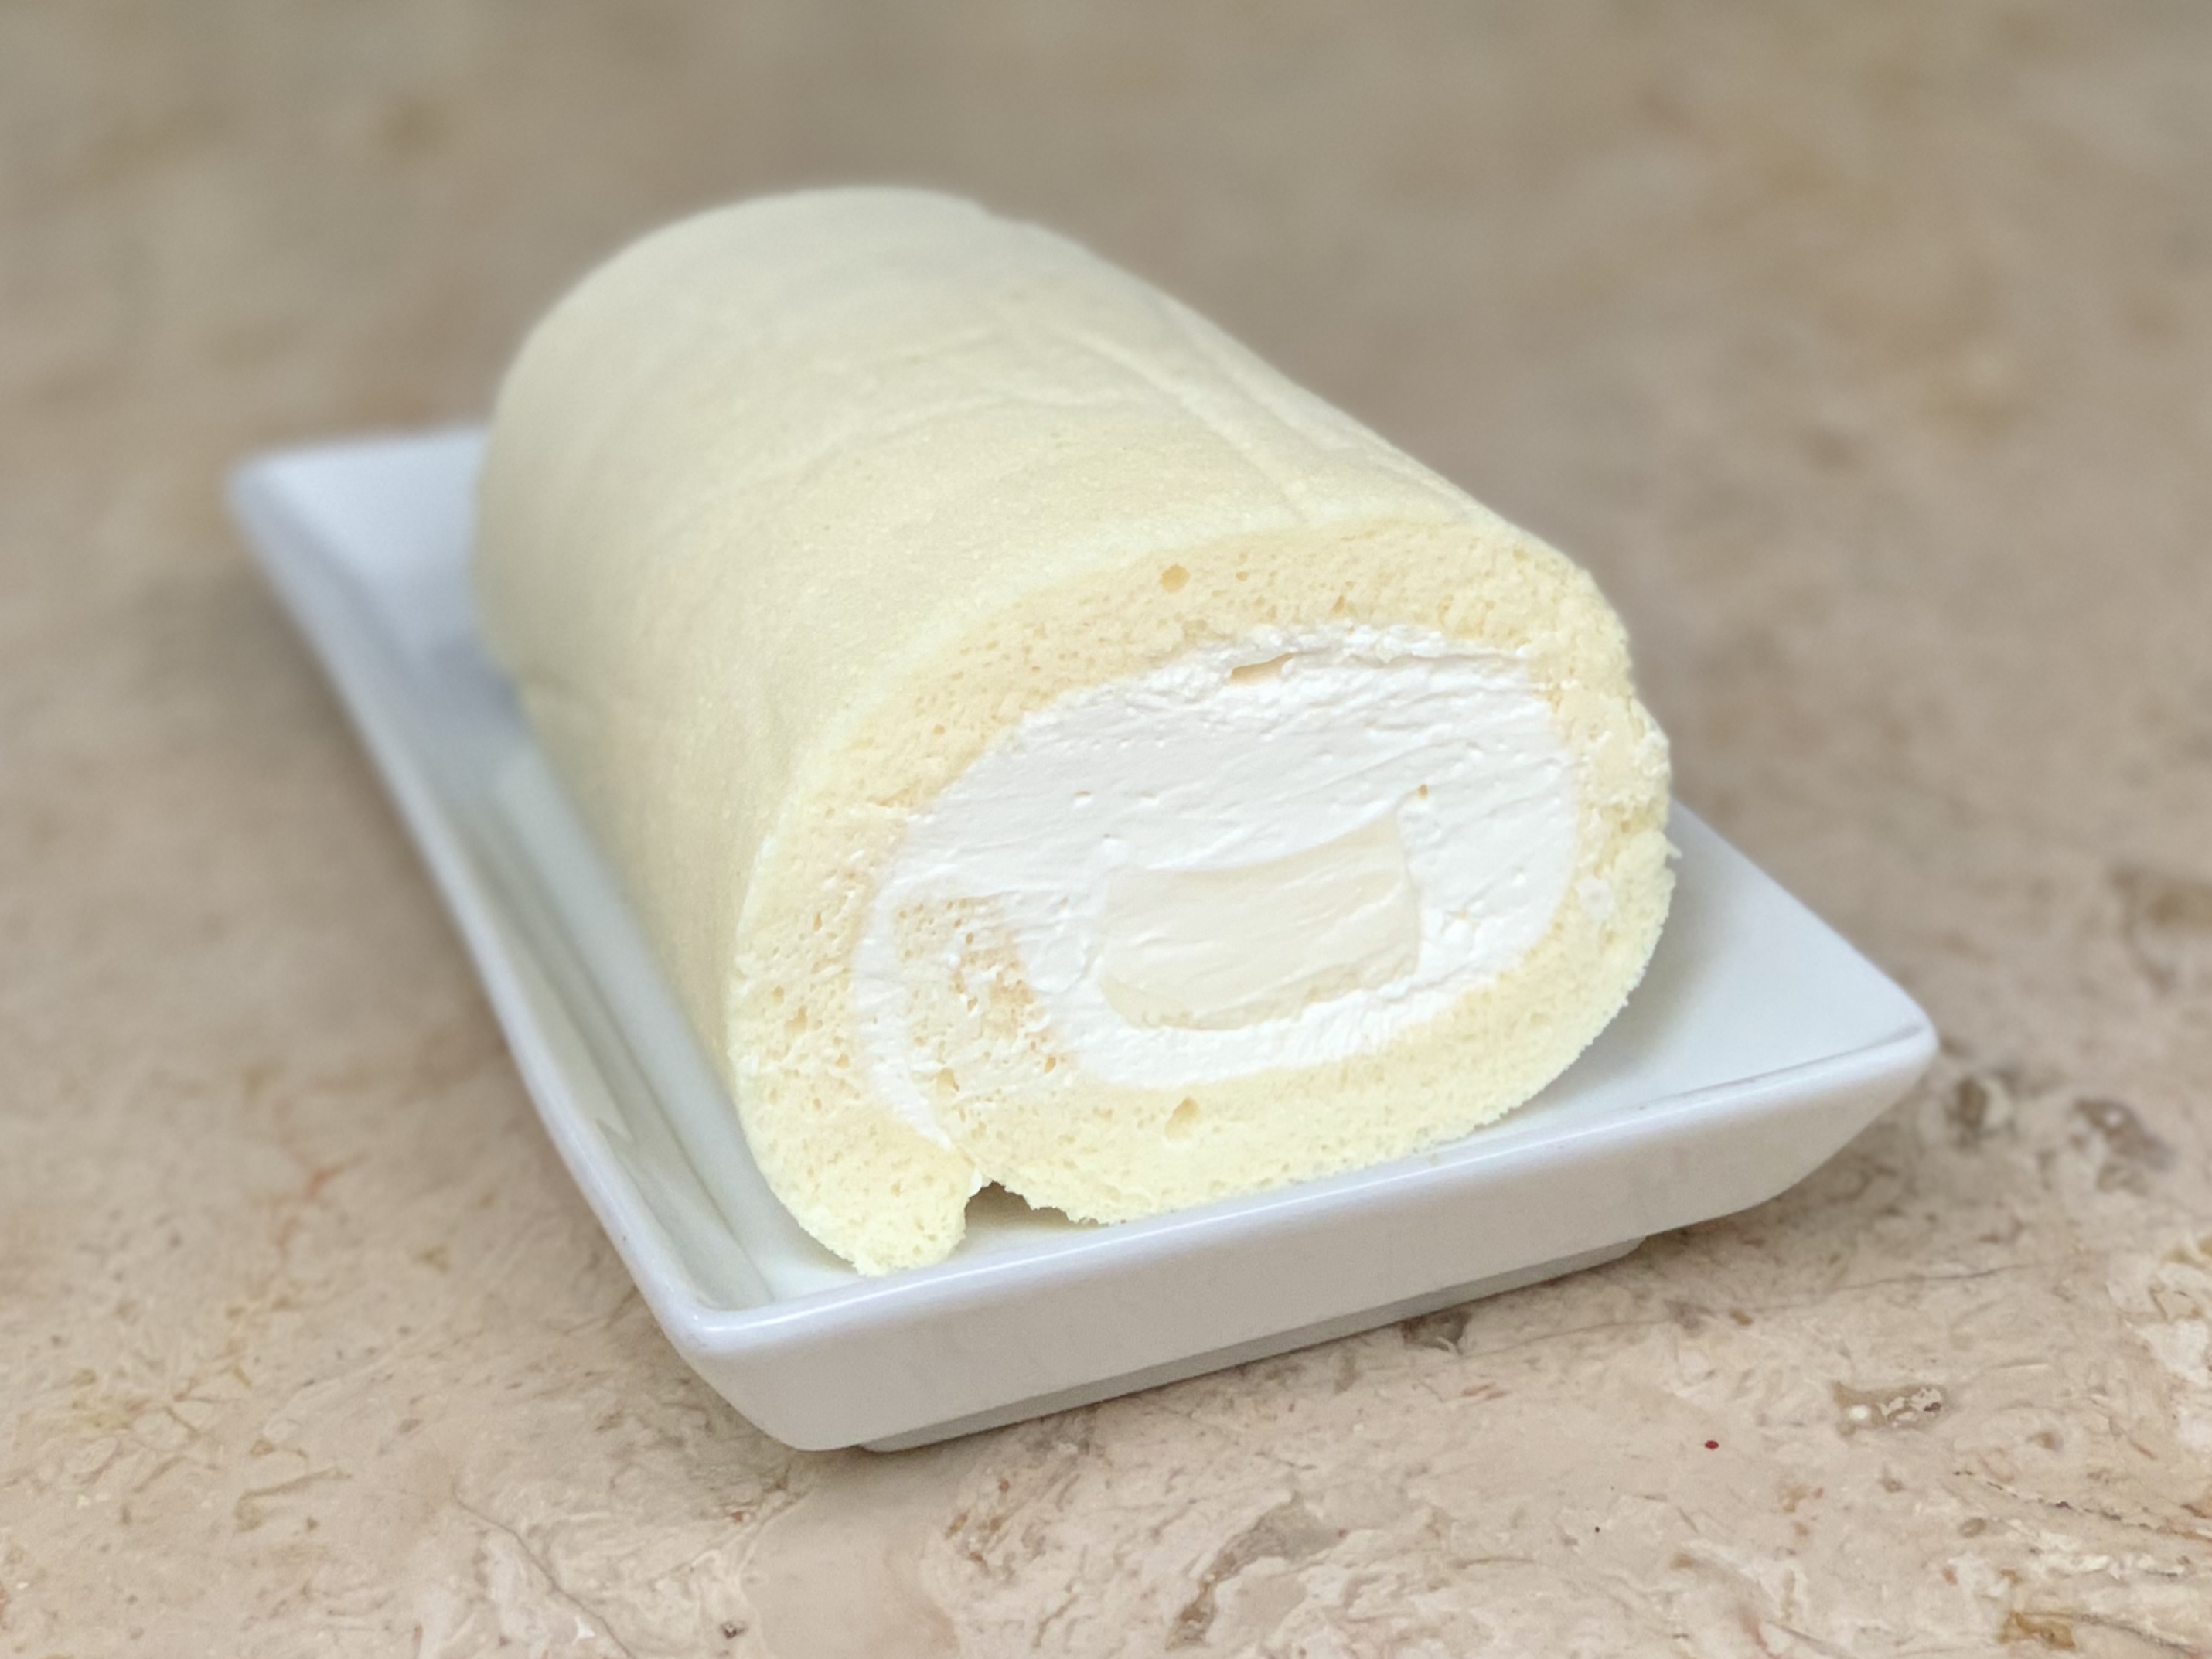 Who would’ve thought chewy candies can take part in the baking of a roll cake? Our parago chewy milk is a great addition to this recipe as it brings out the milky flavor, making it more creamy and savory. This roll cake gets better with every bite, it is super light and soft, making it the perfect go to dessert after a heavy meal!  Ingredients:  Jelly:  30g Full cream milk 20g Heavy cream 3 pieces of PARAGO® Milk Chewy Candy 2g Gelatin powder 15g Cold water Cream:  55g Heavy cream 35g Full cream milk 6 pieces of PARAGO® Milk Chewy Candy 160g Whipping cream Sponge Cake:  35g Full cream milk 15g Vegetable oil 2g Vanilla extract 35g Cake flour 135g Egg whites 45g Caster sugar Instructions:  Jelly:  Sprinkle gelatin powder on the cold water and mix until there are no lumps. Set aside to bloom for 5 minutes. Meanwhile, put the milk, heavy cream, and PARAGO®️ Milk Chewy Candies in a saucepan and place it on a stove that is set on low heat. Stir the mixture until the candies are all melted. Microwave the bloomed gelatin for 10 seconds, then take it out and stir the mixture. Put it back in the microwave for another 10 seconds. Take it out and mix until all the gelatin has dissolved. Pour the dissolved gelatin into the milk, heavy cream, and candy mixture. Stir until combined. Line a 10cm x 5cm mold or container with heat-proof plastic wrap. Pour the jelly into the mold, let it cool slightly, then cover and place it into the fridge for at least 8 hours. Cream:  Pour the milk, heavy cream, and PARAGO®️ Milk Chewy Candies in a saucepan and place it on a stove that is set on low heat. Stir the mixture until the candies are all melted. Then, pour the mixture into a bowl and cover the surface directly with heat-proof plastic wrap. Let it cool slightly, then chill in the fridge for at least 8 hours. After fully chilled, combine the candy mixture with the whipped cream in a bowl, and beat them together with an electric mixture using the whip attachment until medium peaks. Cover the bowl with plastic wrap, then place it in the fridge for later use. Sponge Cake:  Preheat the oven to 160°C. Grease a 22cm x 22cm square pan with vegetable oil, then line all the sides of the pan with parchment paper. In a bowl, mix the milk and the vegetable oil with a whisk until emulsified, then add the vanilla extract and whisk until combined. Sift in the cake flour and whisk until there are no more lumps. In a separate bowl, whip the egg whites with an electric mixer until bubbly. Then, gradually add the castor sugar while continuously mixing. When all the sugar is added, keep mixing until the mixture reaches medium peaks. Take 2 scoops of the egg white mixture and mix it with the batter using the whisk. After combined, continue to add in ½ of the egg whites. Fold the mixture with a spatula gently until they are almost combined. Add the remaining egg whites, then fold the mixture again until fully combined. Pour the batter into the cake pan, then bake it in the oven for 15 minutes. Cool it on a rack completely before handling. Assembling the Roll Cake:  Take the jelly out of the mold and cut it lengthwise into 2 equal strips. Carefully take the cooled sponge cake out of the pan. Turn the cake pan over, then place the cake on top of the inverted cake pan. Next, turn the cake over onto a piece of parchment paper that is bigger than the cake. Peel of all the parchment paper, then cut the right and left edges of the cakes with a serrated knife.  Spread ⅔ of the cream on the cake. Place the jelly strips on top of the cream on 1 end of the cake that will be rolled. Cover the jellies with the remaining cream and shape the cream into a mountain to keep the shape of the roll cake circular and not flat. Roll the cake with the help of the parchment paper. Wrap the roll cake with the parchment paper and let it set in the fridge for at least 4 hours. Before serving, cut the edges of the roll cake with a serrated knife to reveal the inside. Recipe Created By: Kathleen.Z.B Instagram: @zanetta.kitchen